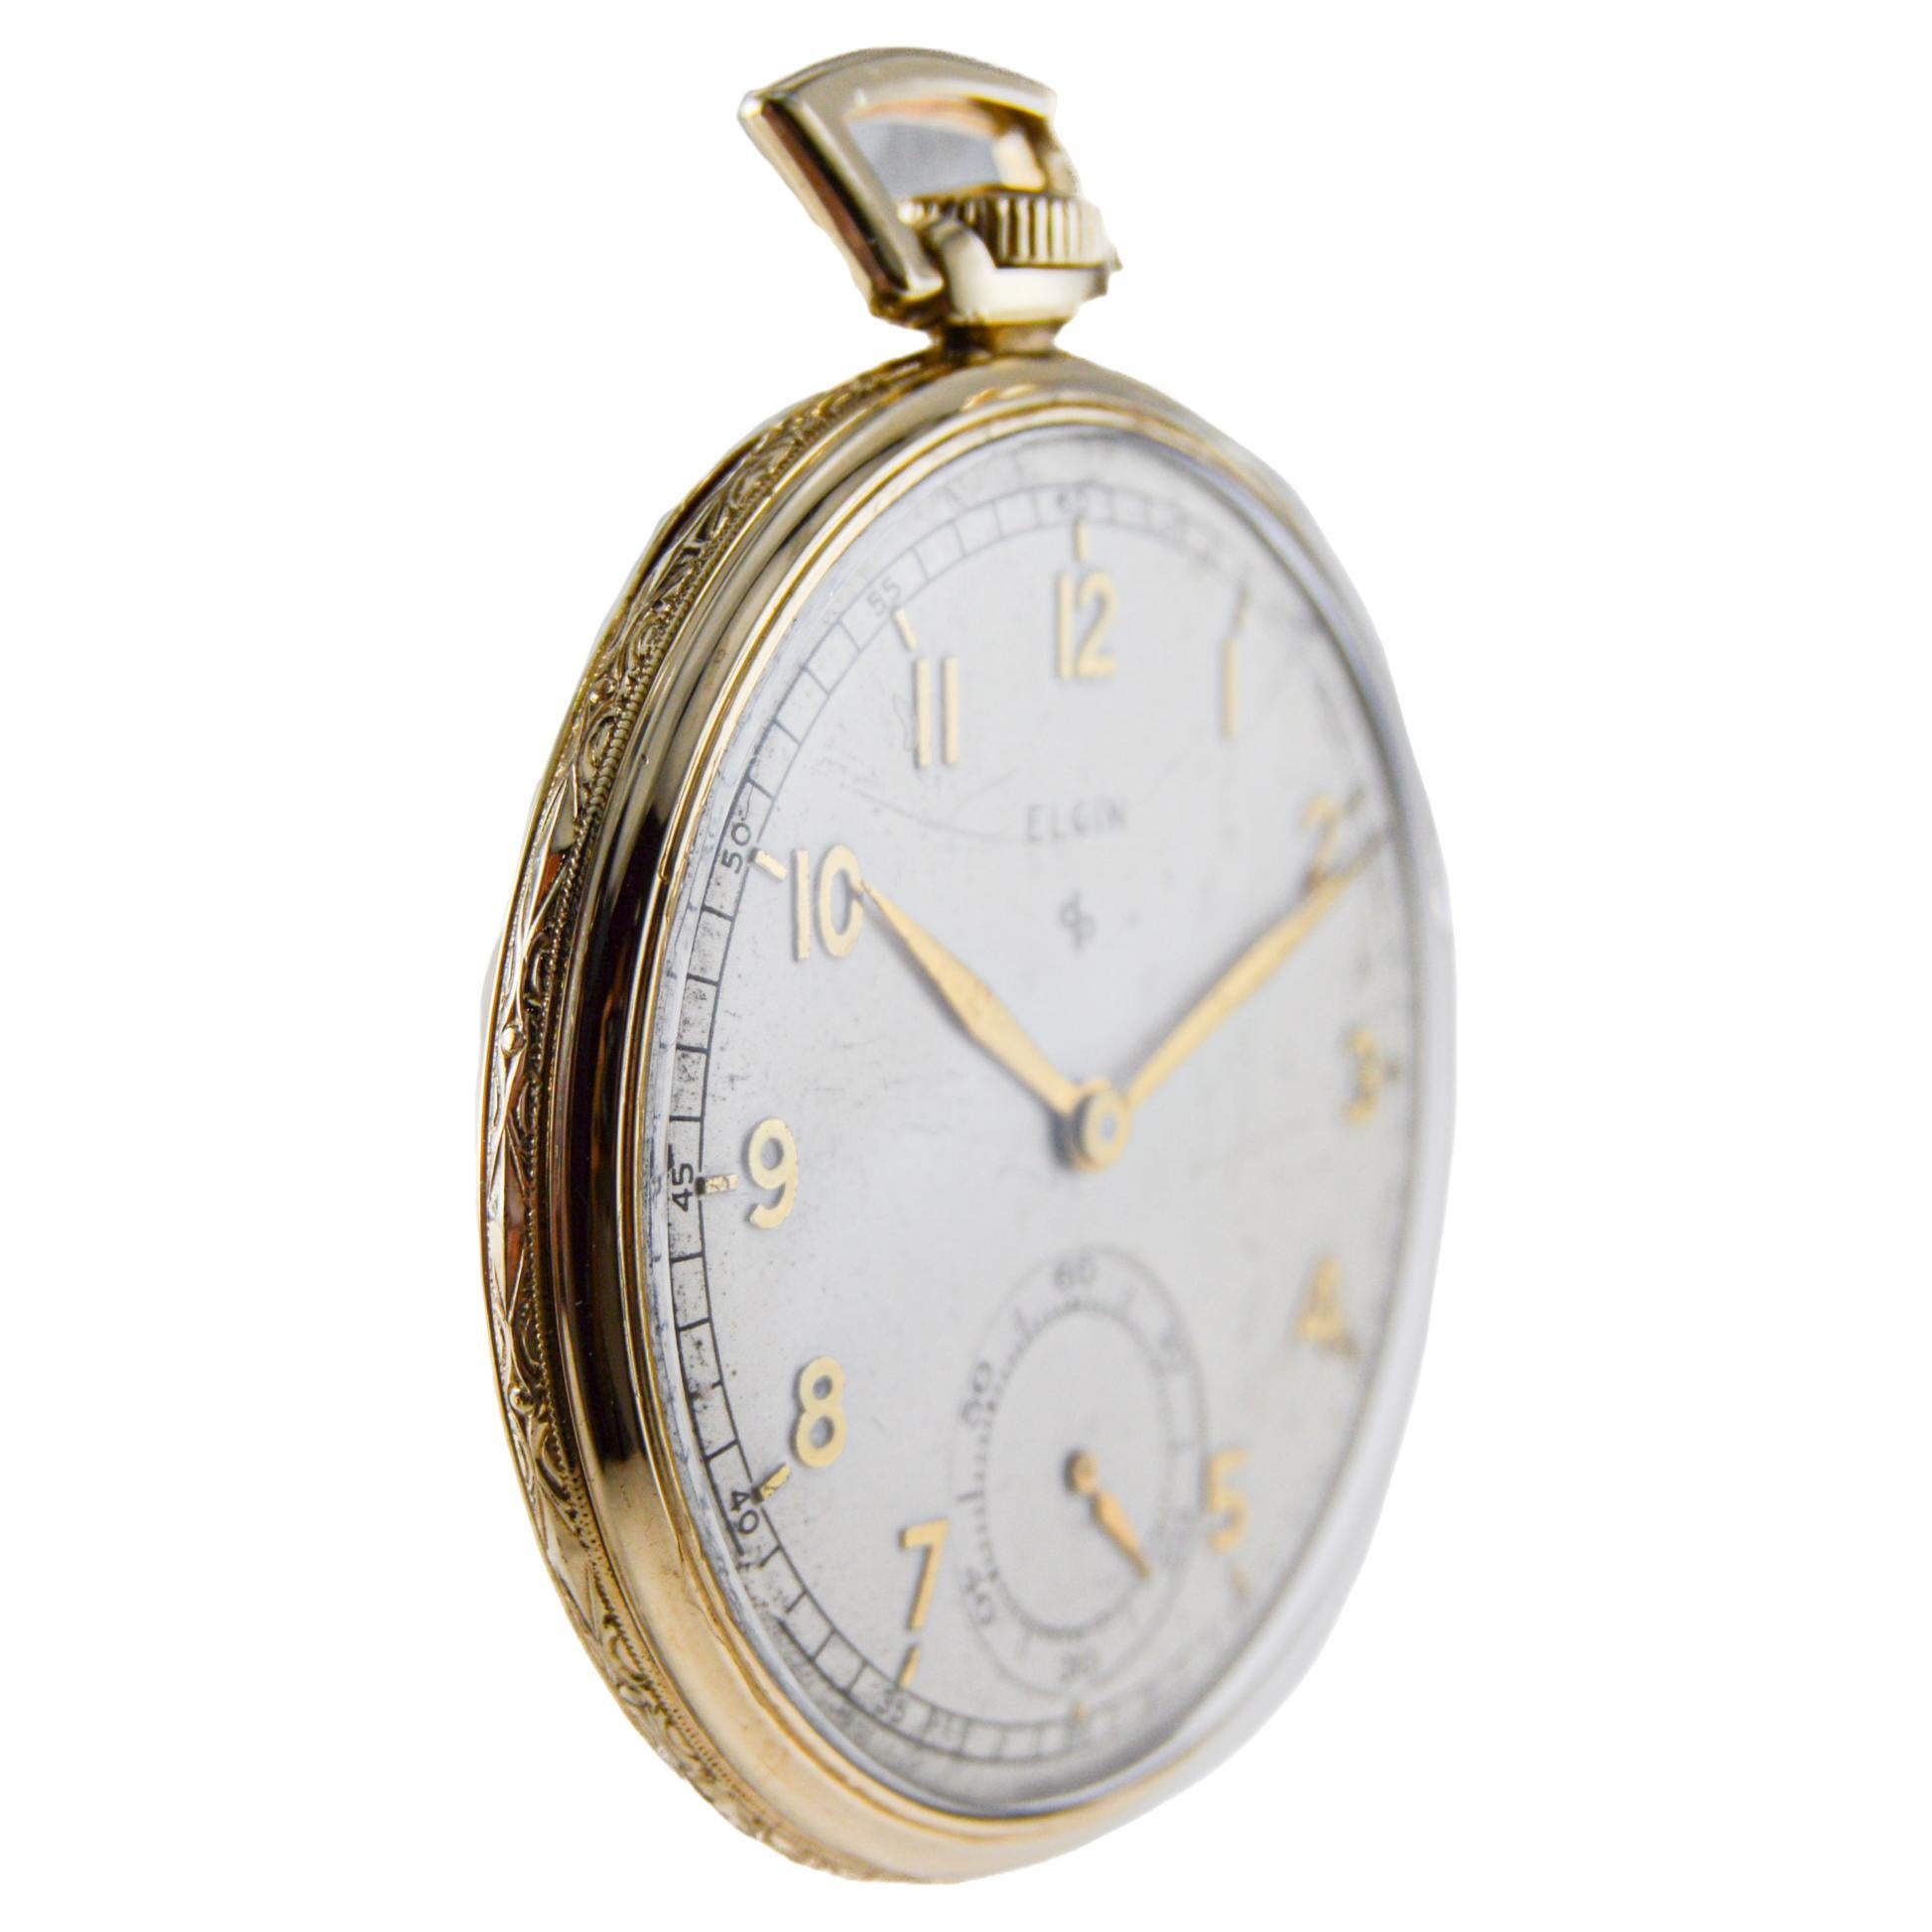 Elgin Yellow Gold Filled Art Deco Pocket Watch with Original Dial, circa 1940s In Excellent Condition For Sale In Long Beach, CA